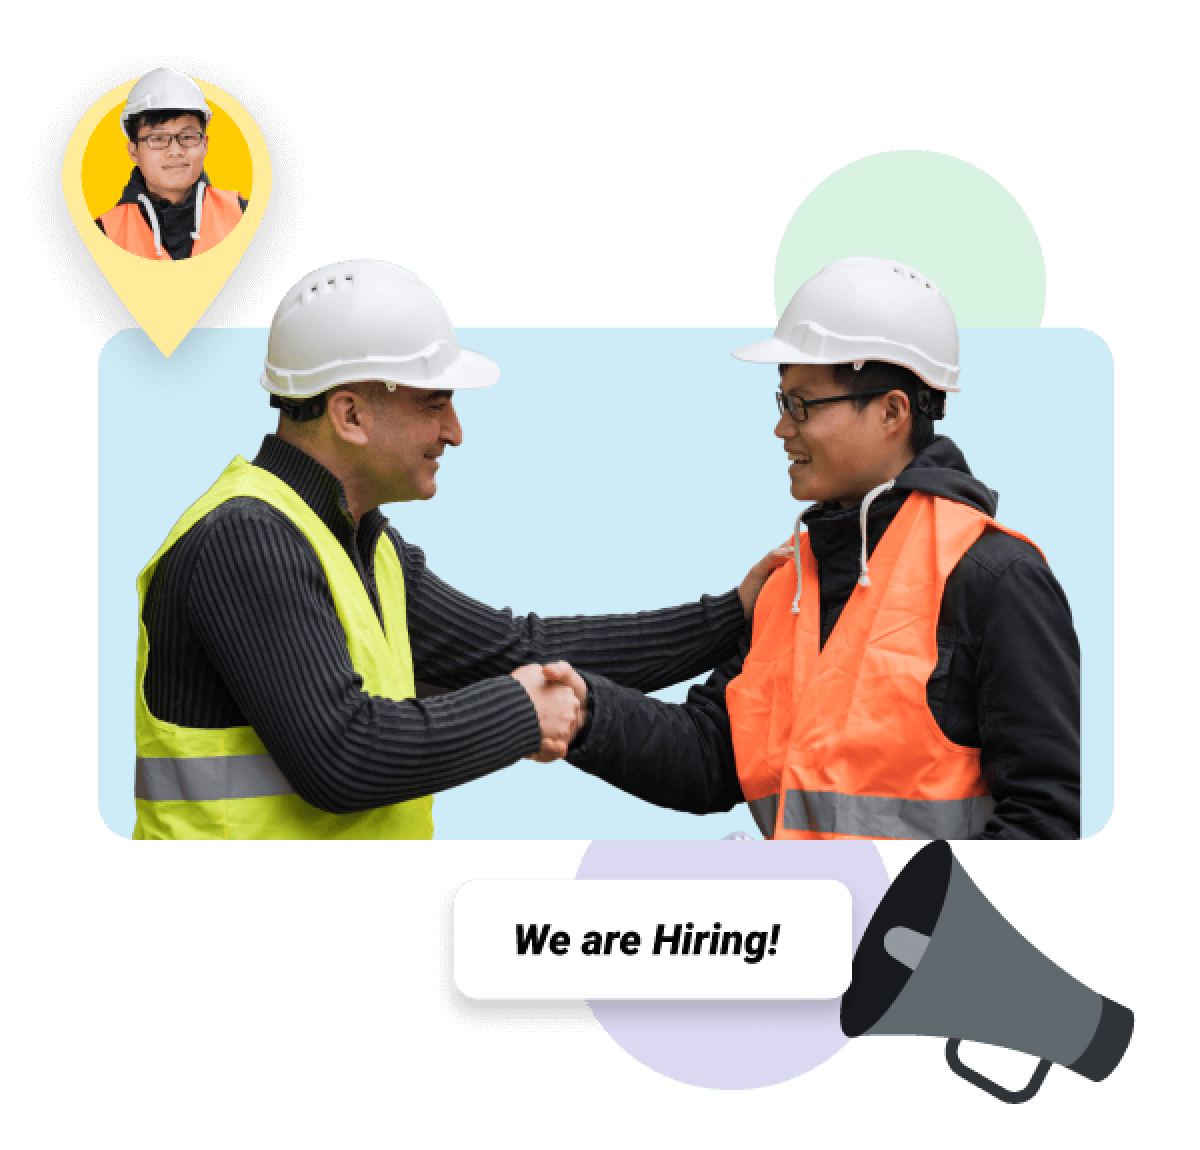 Image of two men in construction jackets and helmets shaking hands.